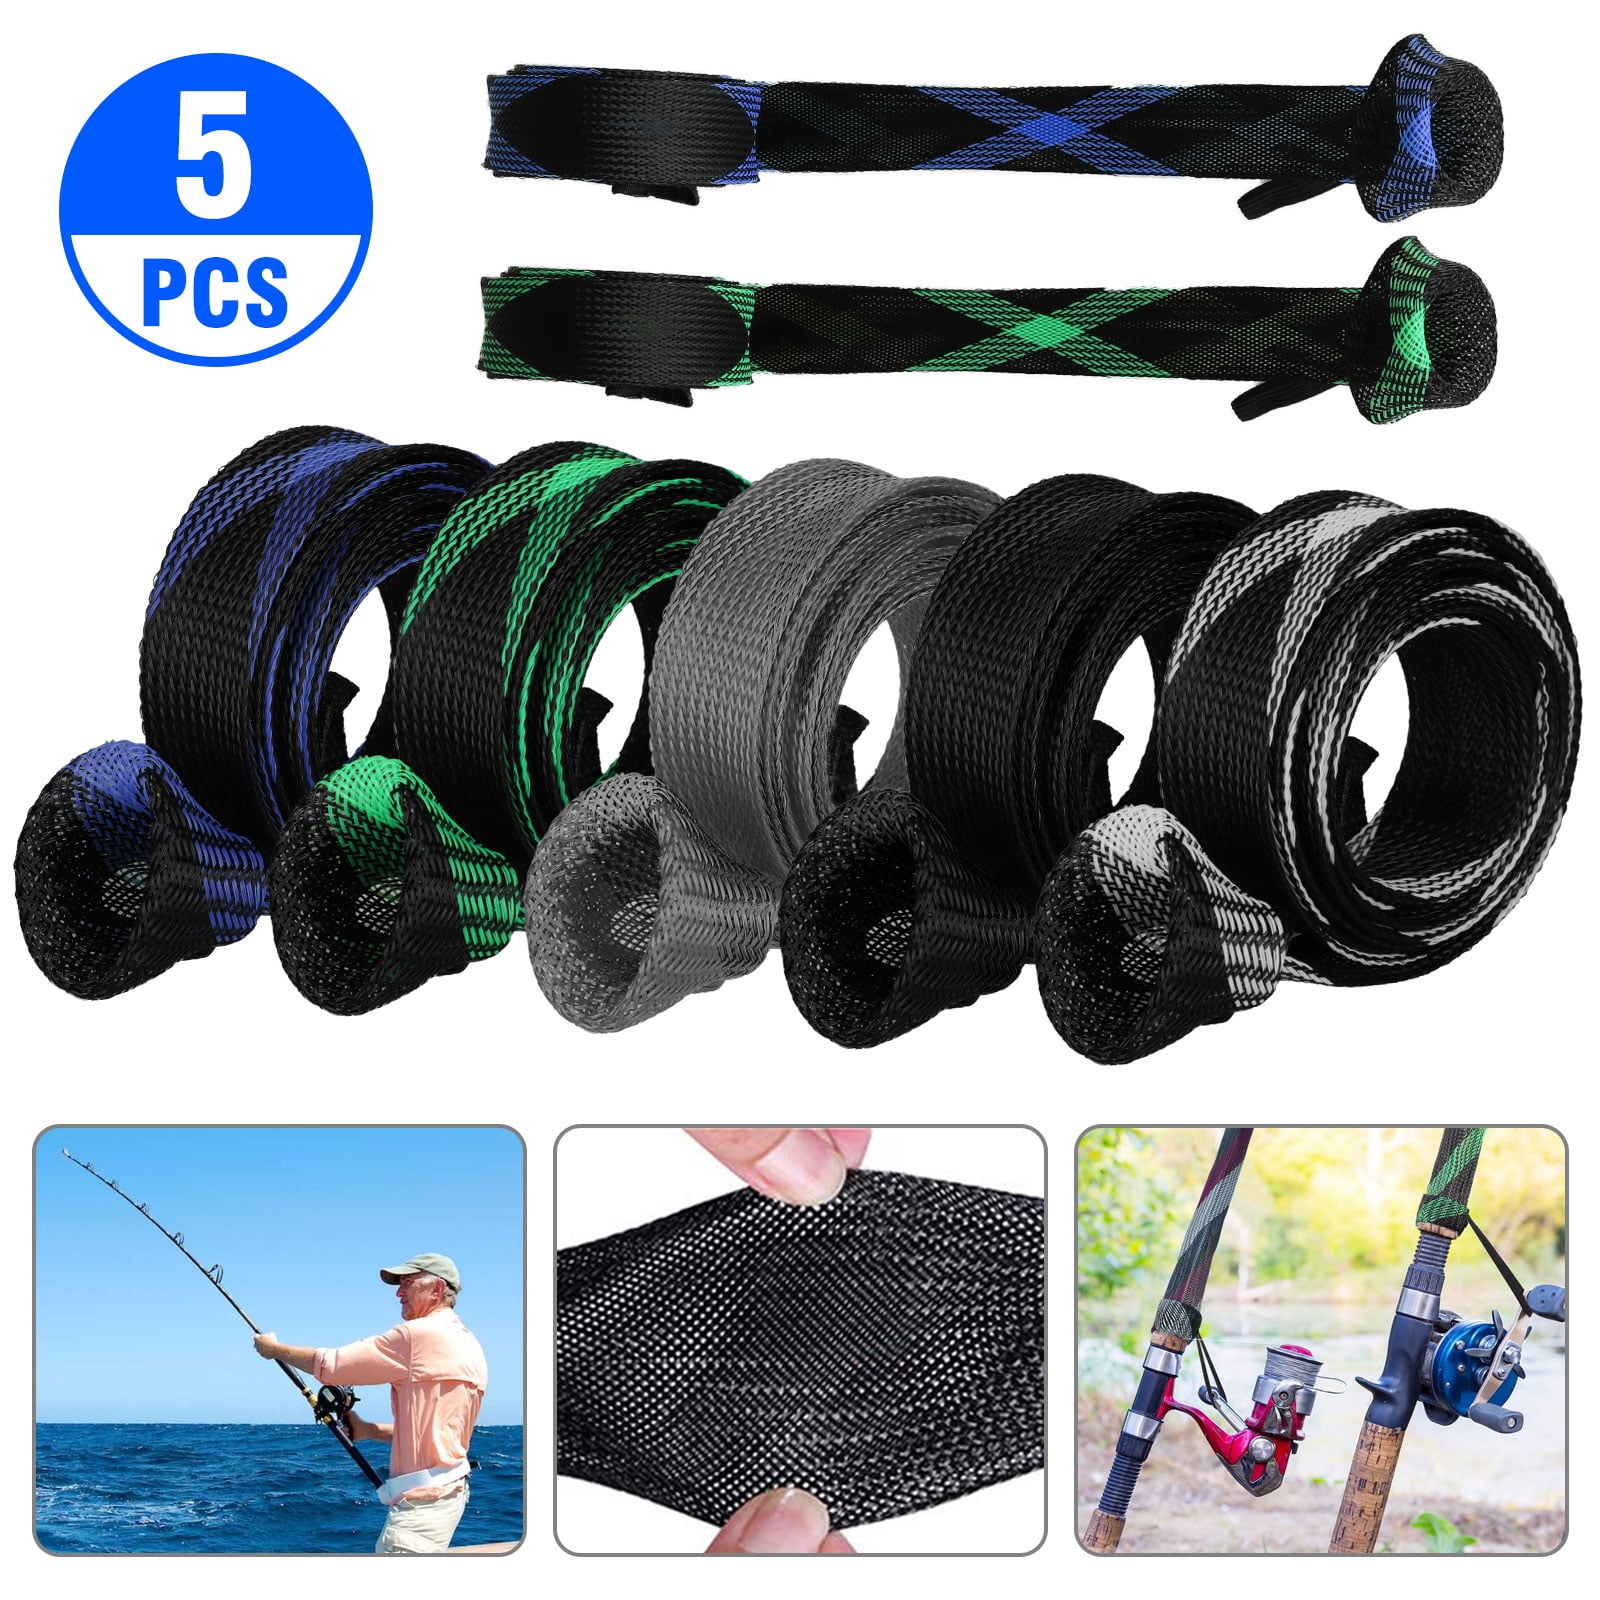 3Pcs//Set Rod Sock Fishing Sleeve Cover Braided Mesh Protector Pole Gloves Tools